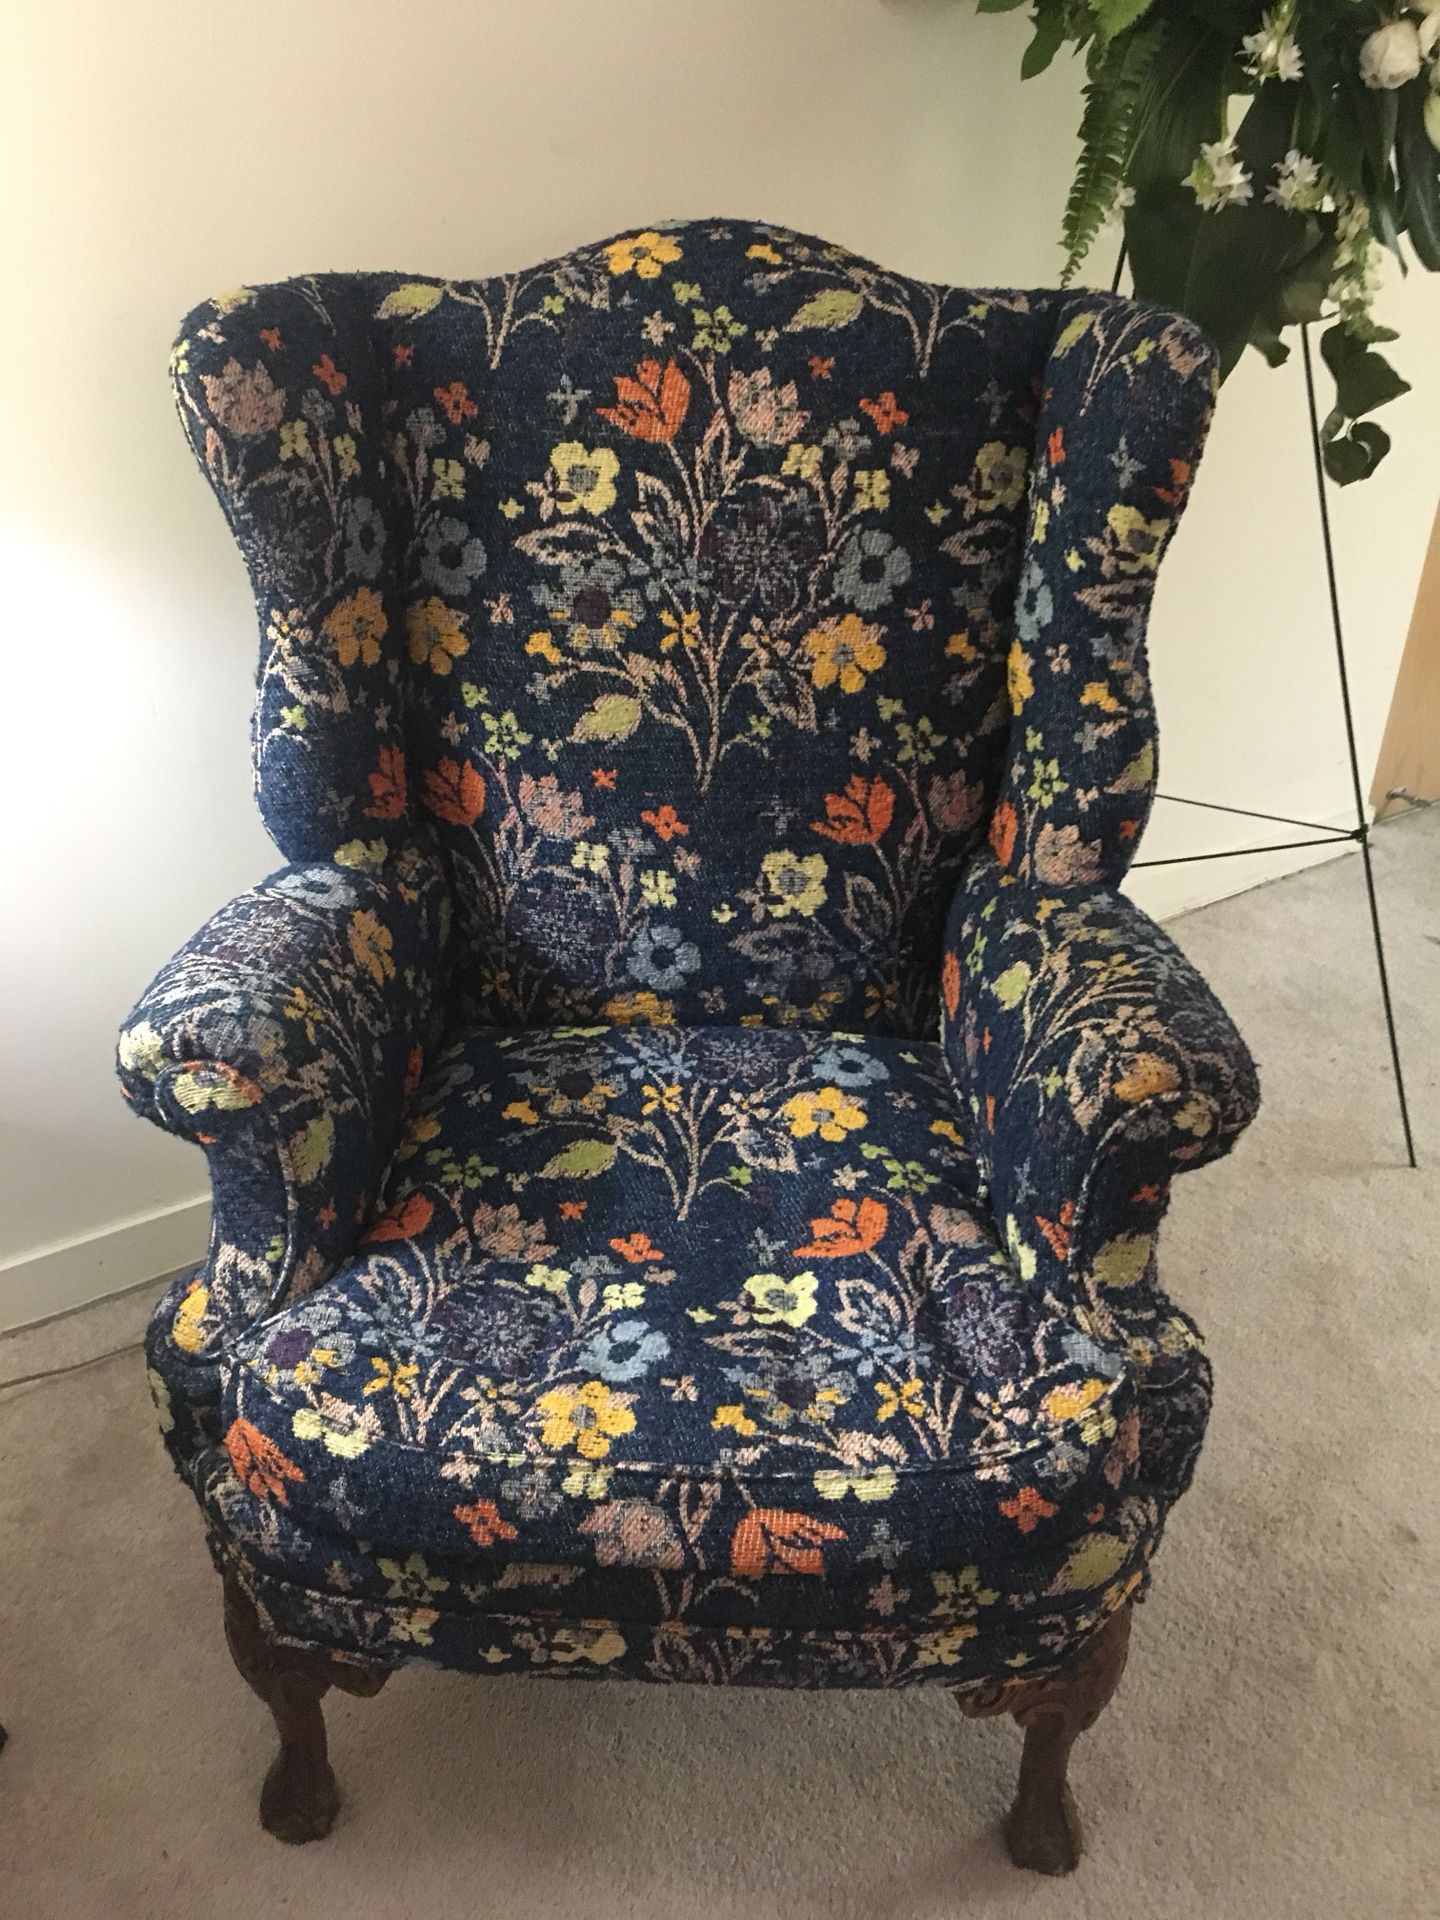 Antique chair from estate sale